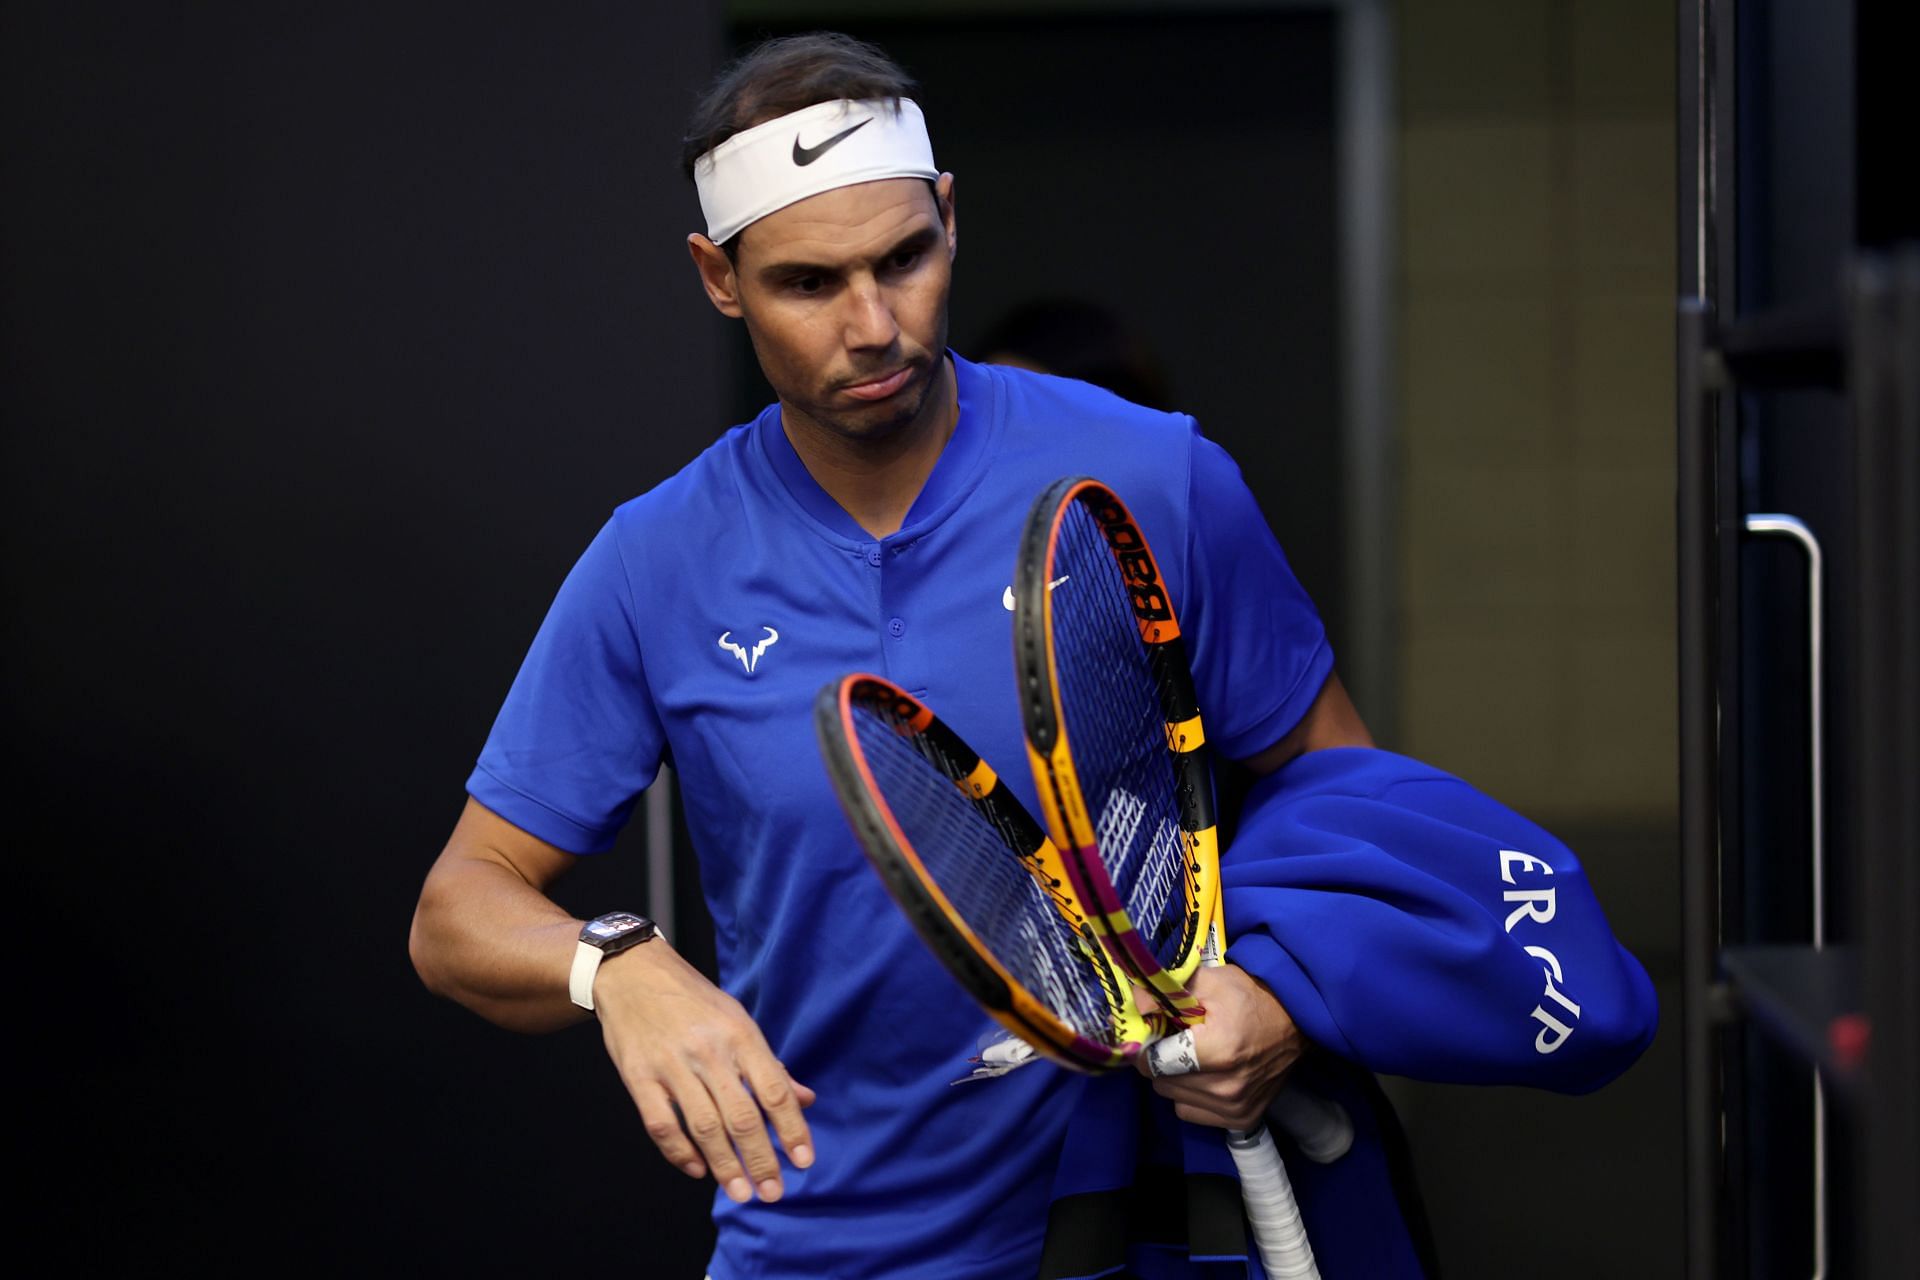 Nadal during the 2022 Laver Cup